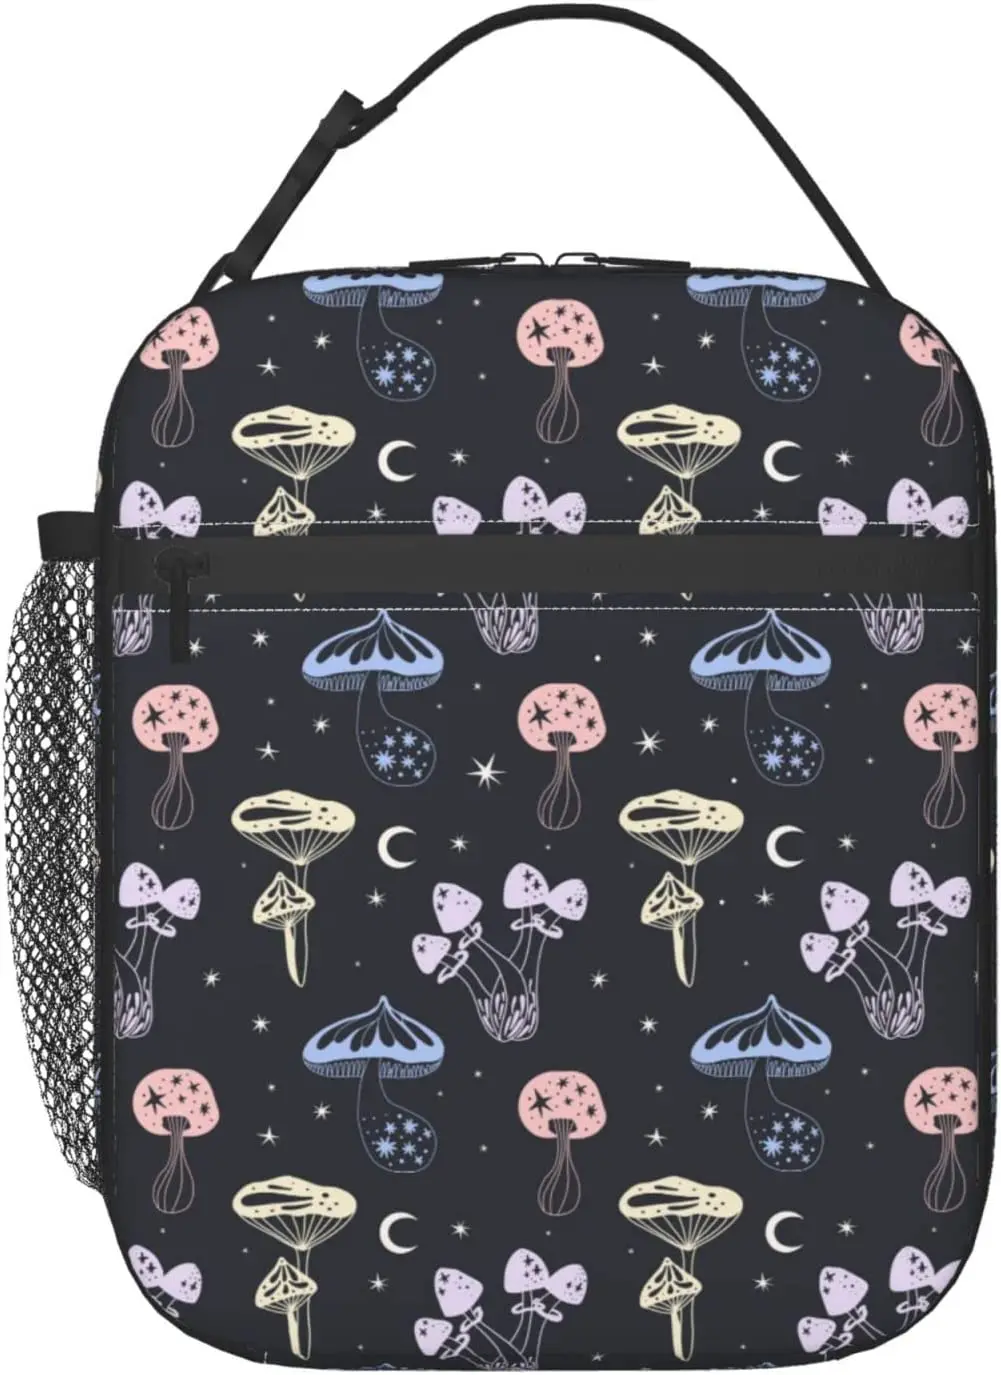 

Space Mushrooms Kids Lunch Box Reusable Insulated Lunch Bag Thermal Cooler Tote for Boys Girls Teen Schoo Picnic Travel